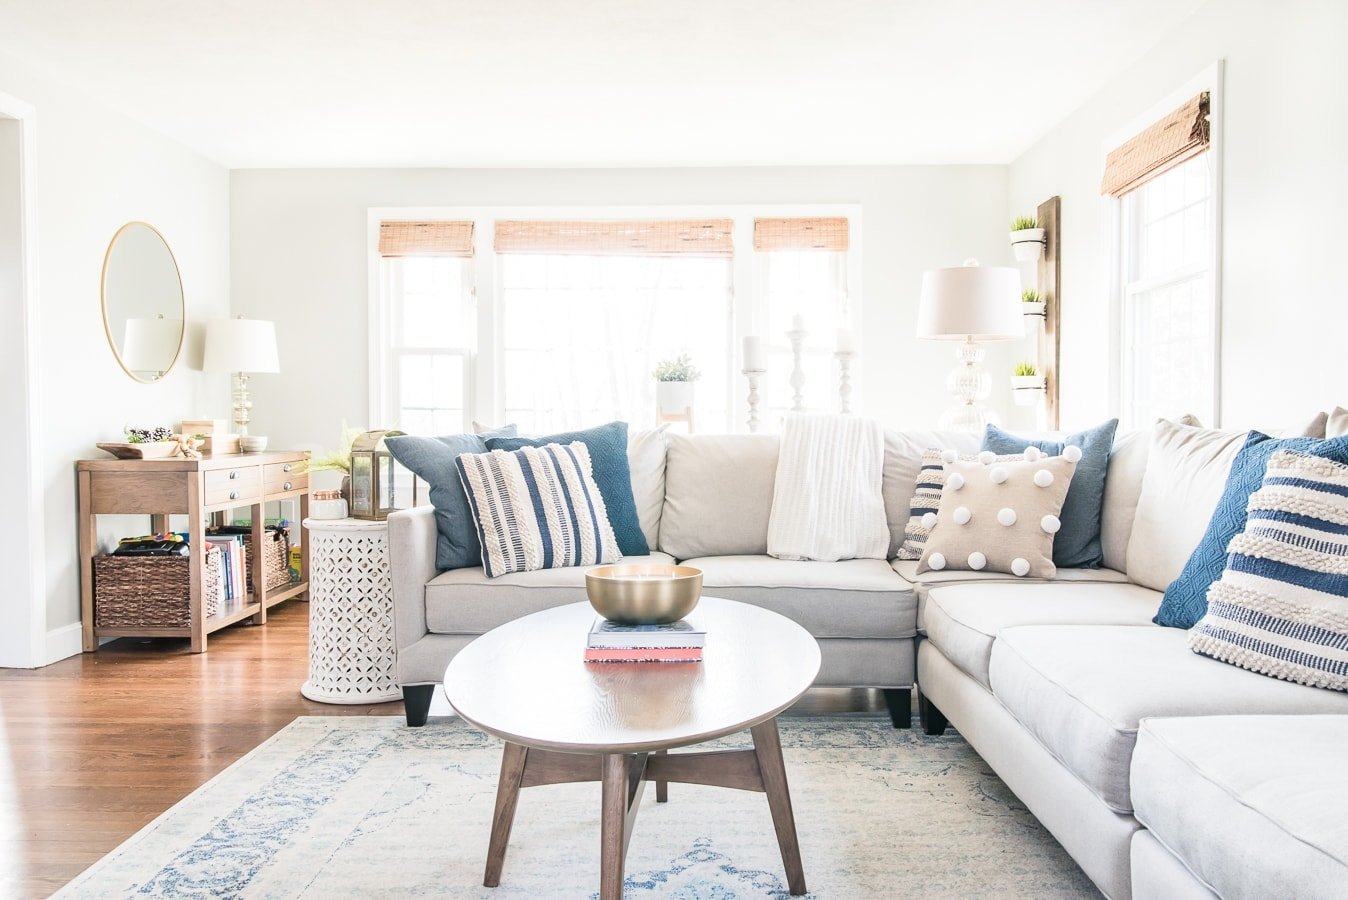 15 Ways to Decorate your Living Room on a Budget